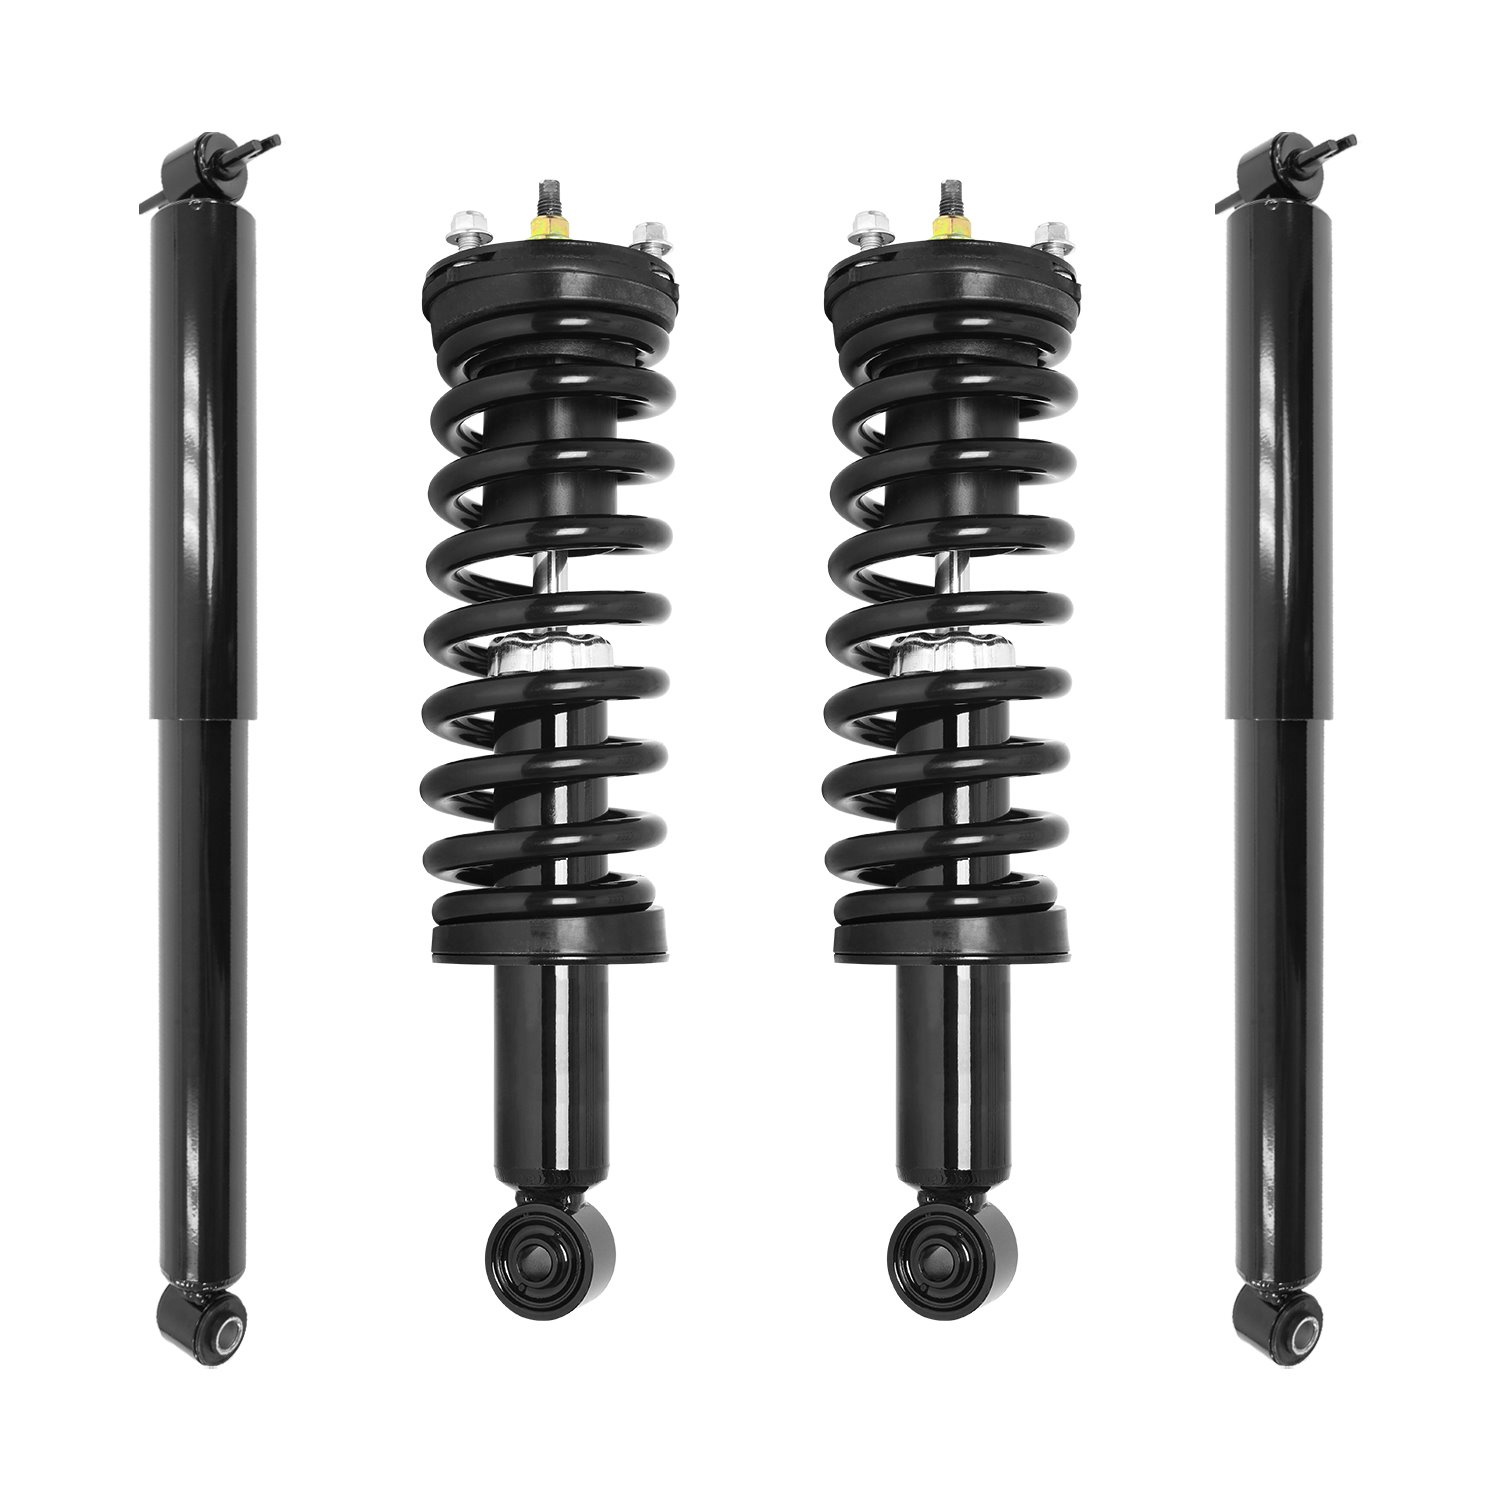 4-11600-251260-001 Front & Rear Suspension Strut & Coil Spring Assembly Fits Select GM